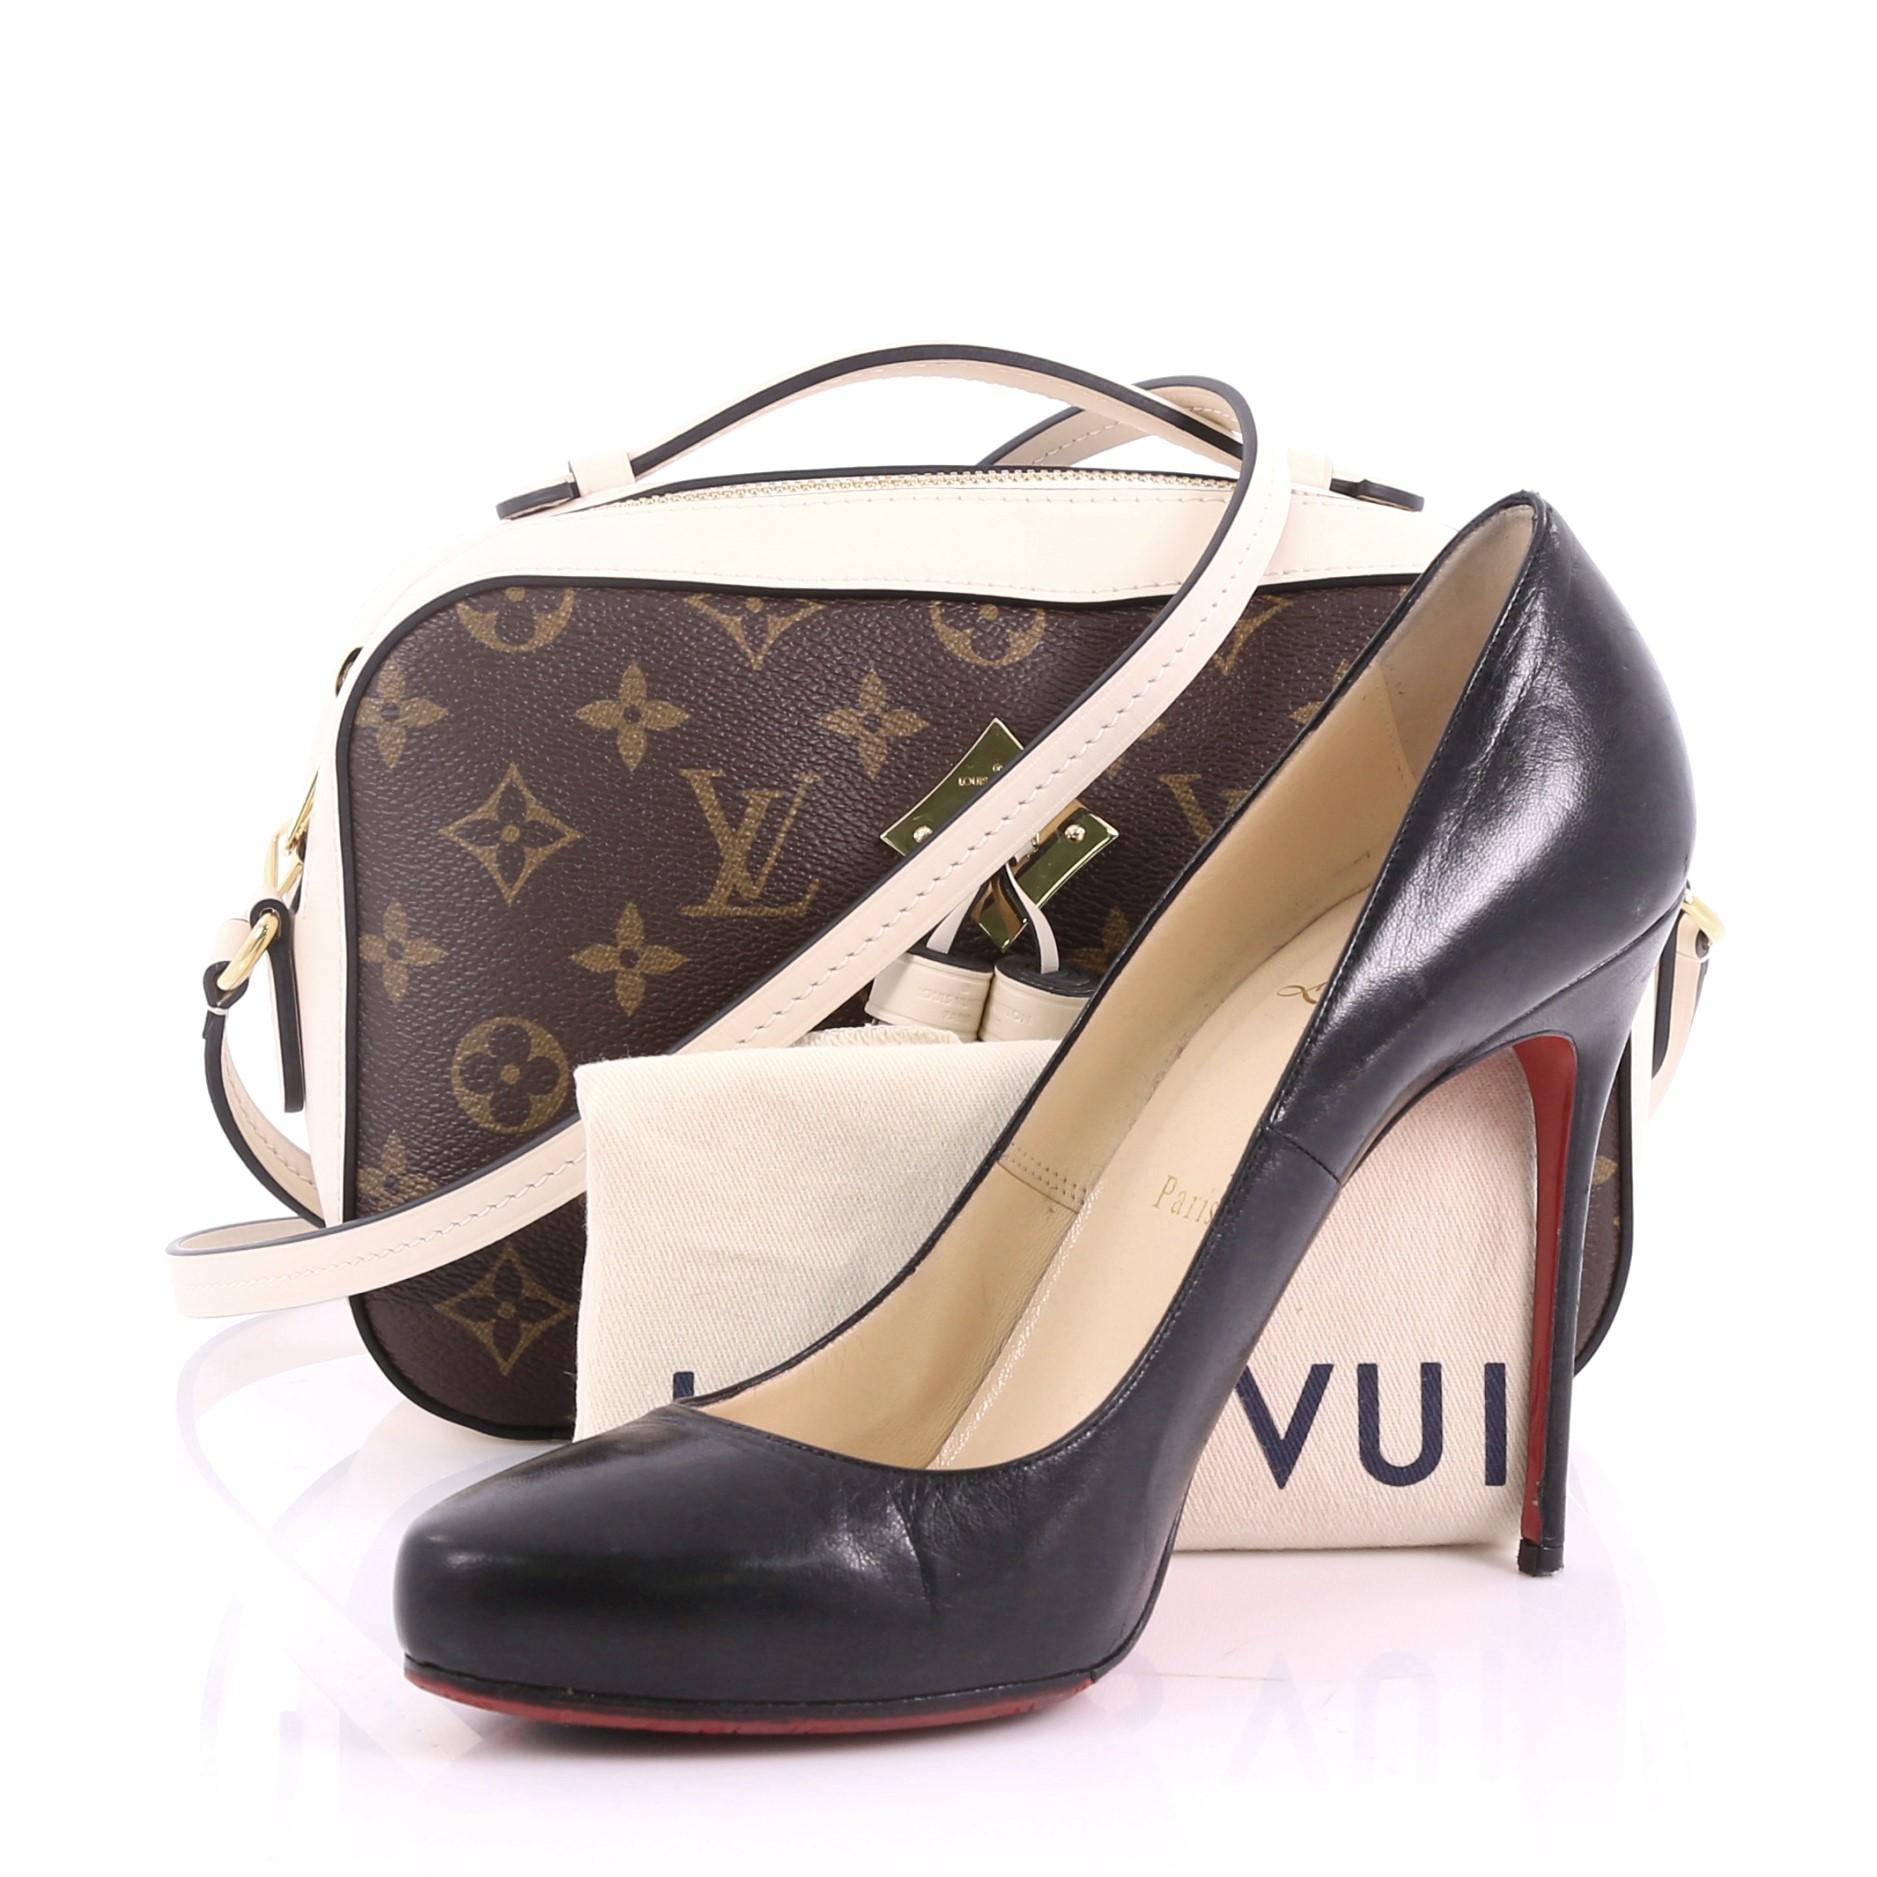 This Louis Vuitton Saintonge Handbag Monogram Canvas with Leather, crafted from brown monogram coated canvas, features top handle and long strap, leather tassels and gold-tone hardware. Its zip closure opens to a white leather interior with slip